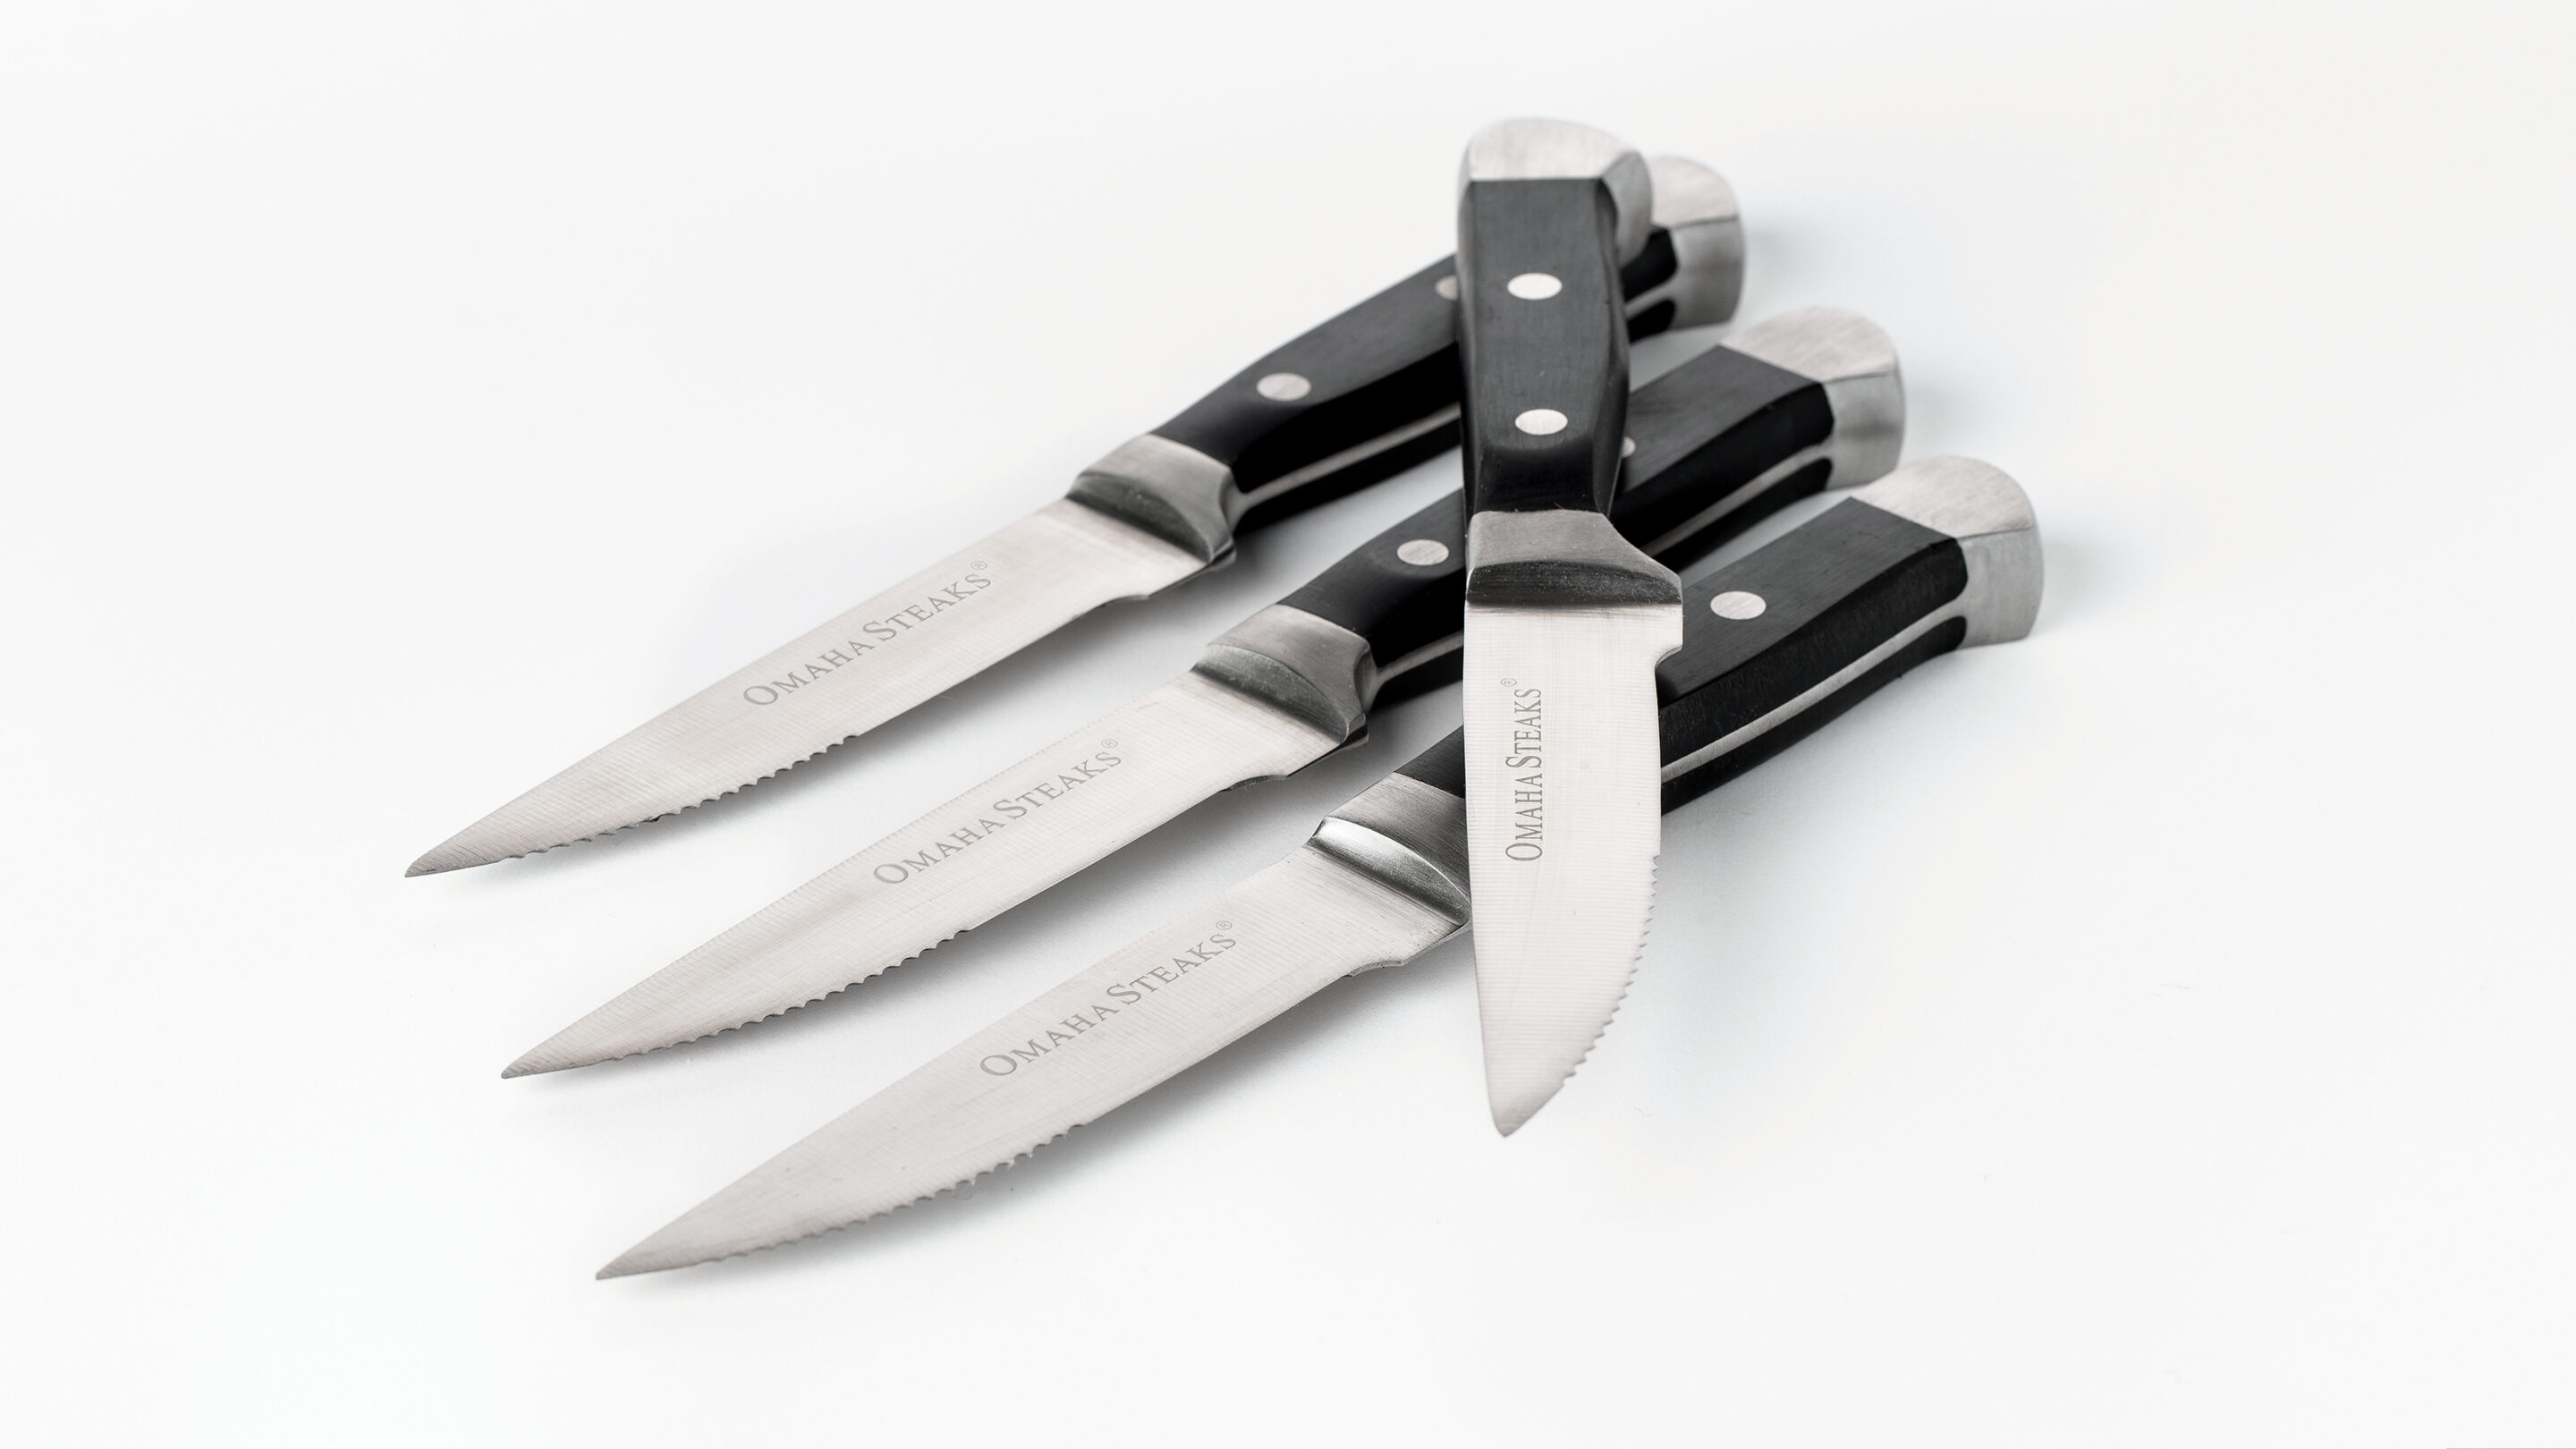 https://blog-content.omahasteaks.com/wp-content/uploads/2022/06/blogwp_knife-work-buying-the-right-set-scaled-1.jpg